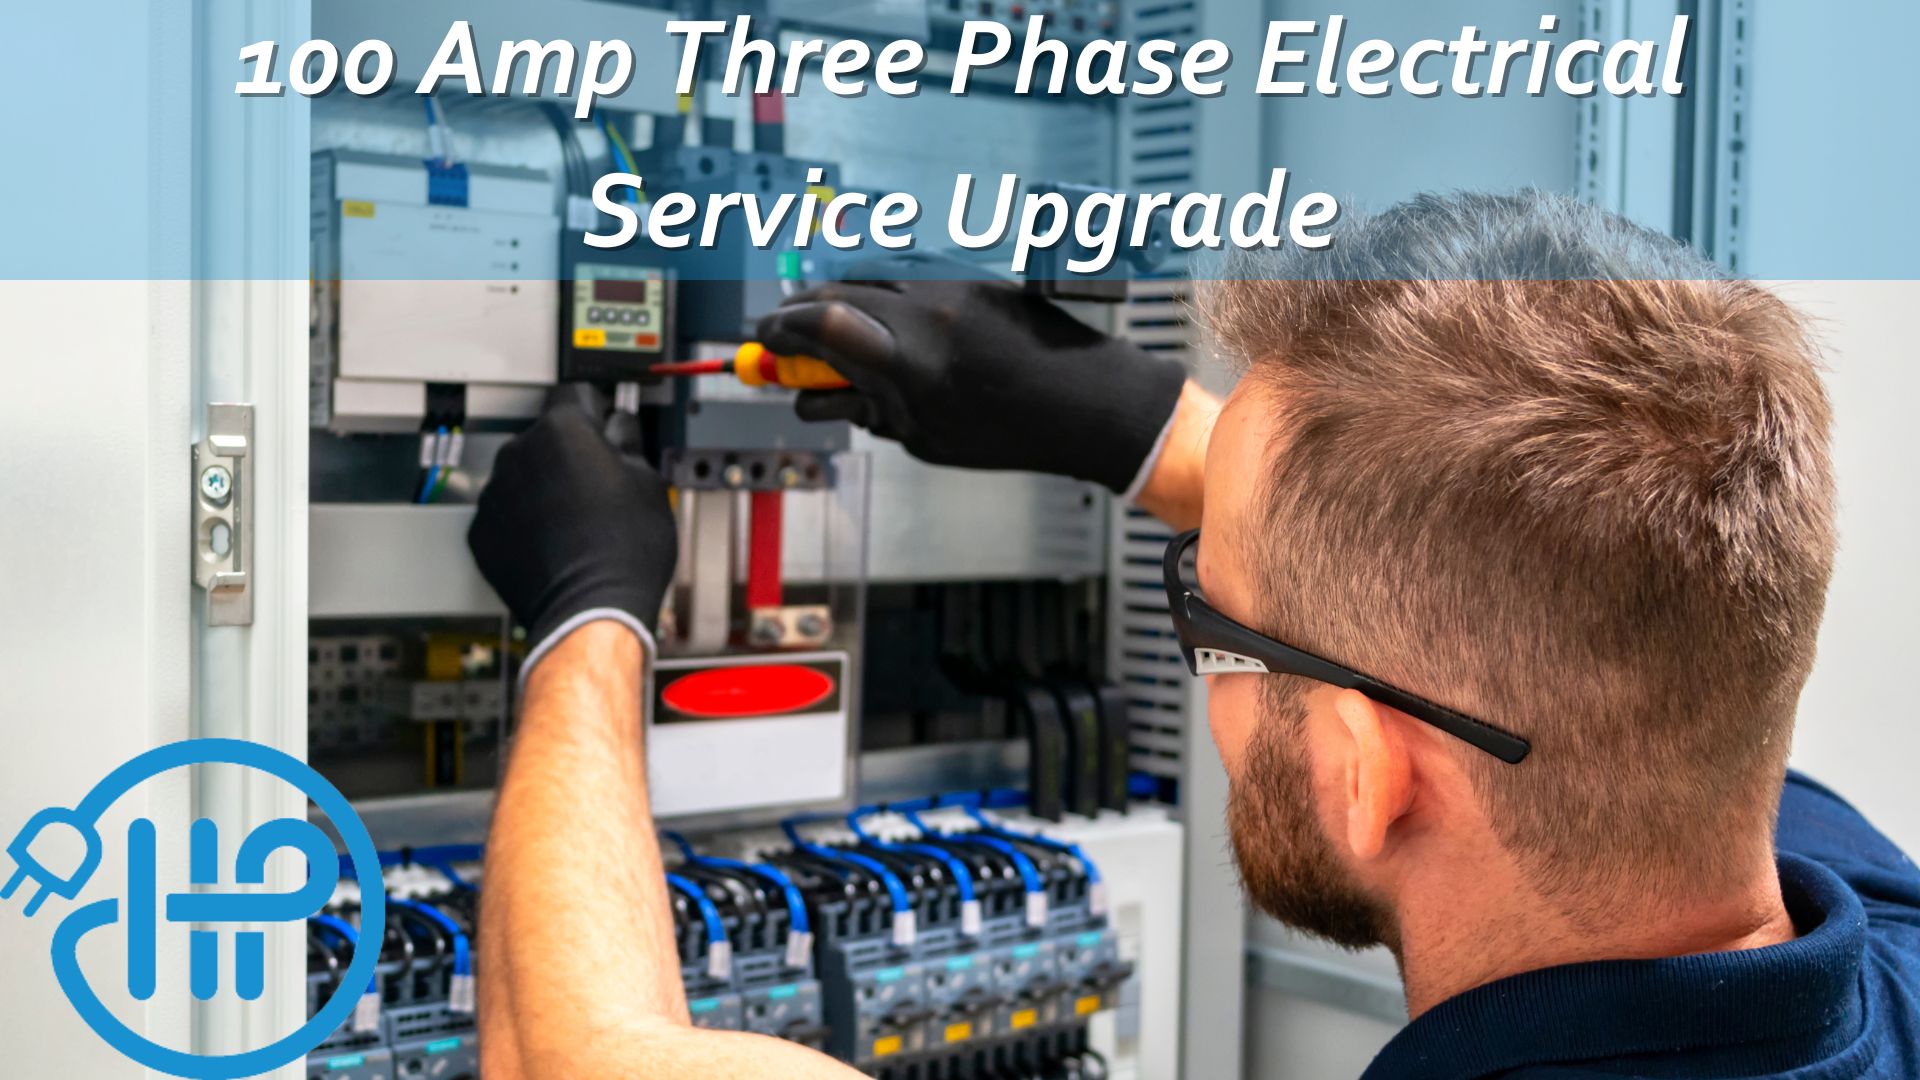 100 Amp Three Phase Electrical Service Upgrade by Hauer Power Electrical Services